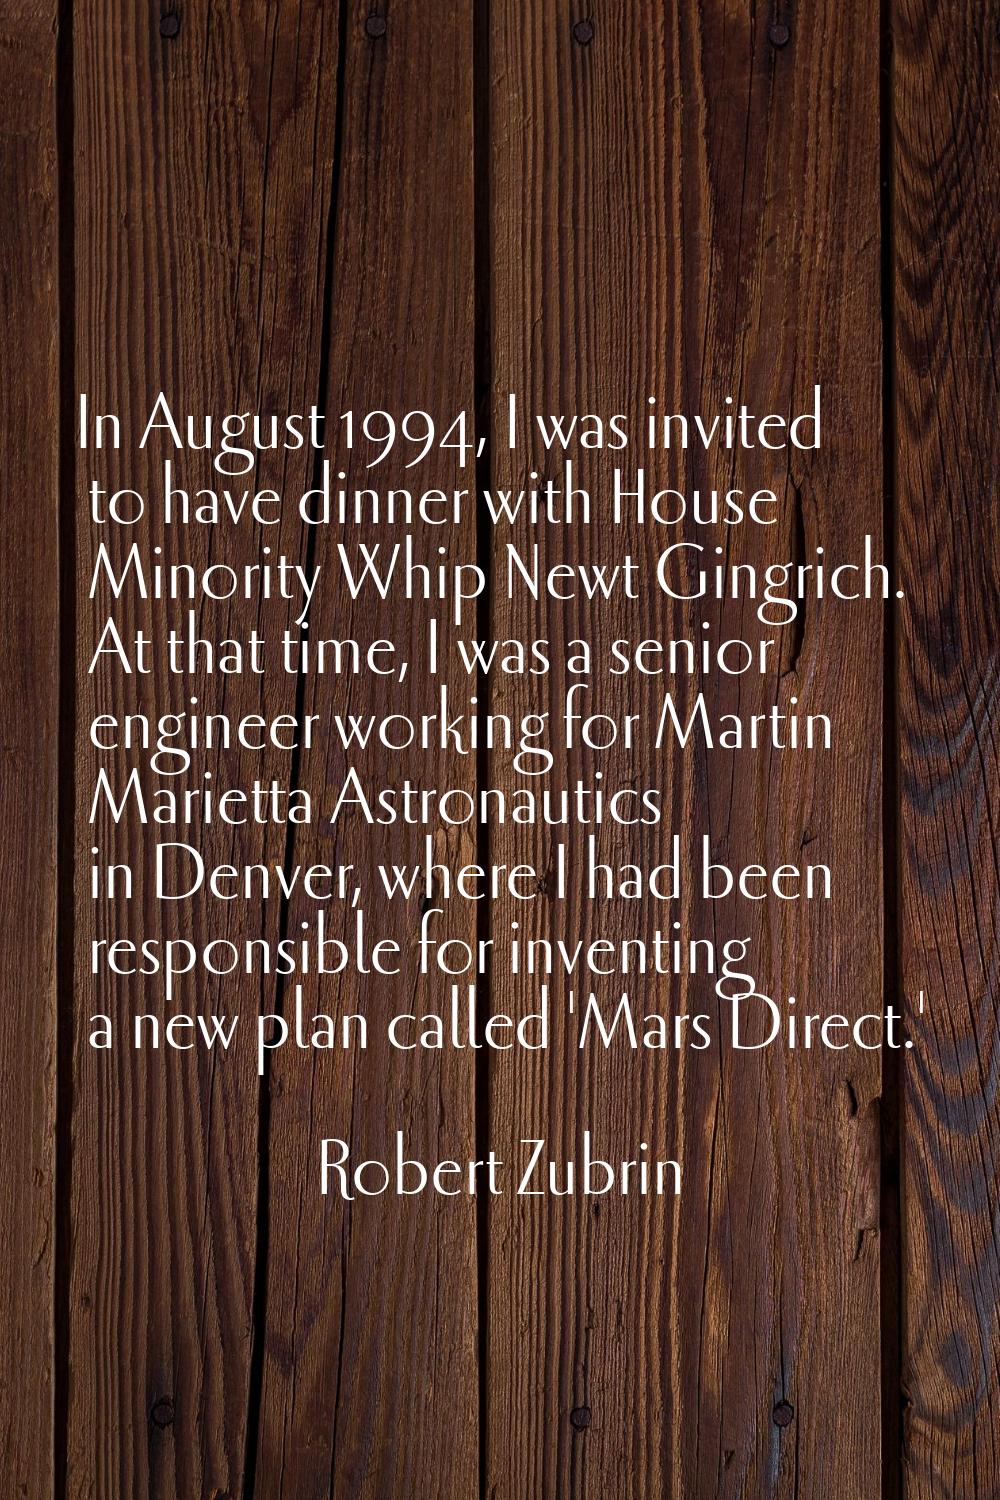 In August 1994, I was invited to have dinner with House Minority Whip Newt Gingrich. At that time, 